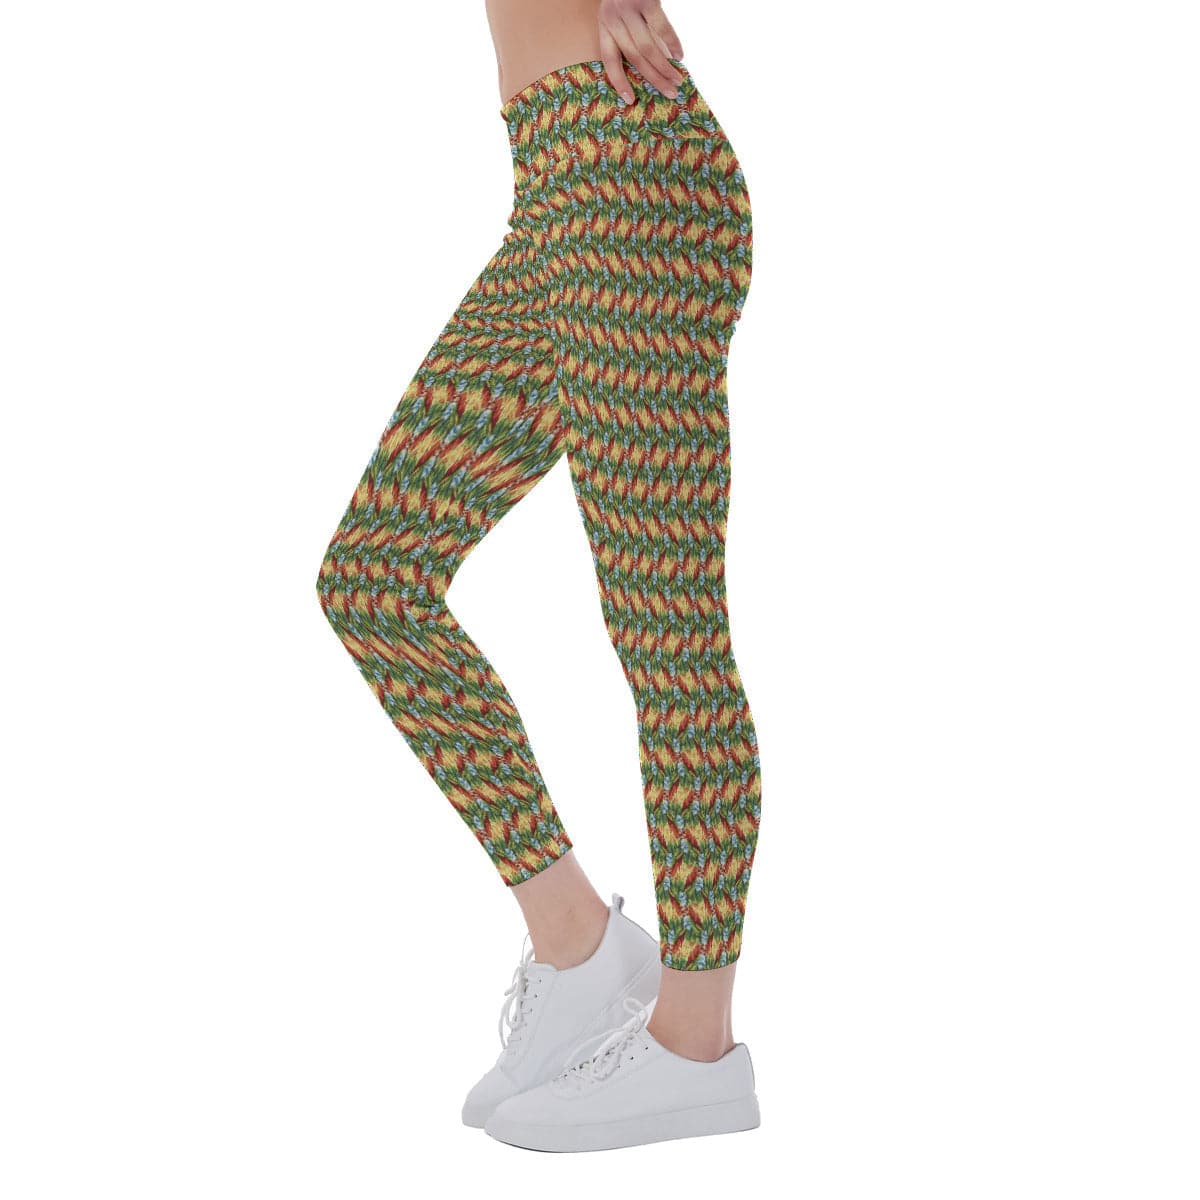 Red Yellow and Green patterned Women's Yoga Leggings, by Sensus Studio Design